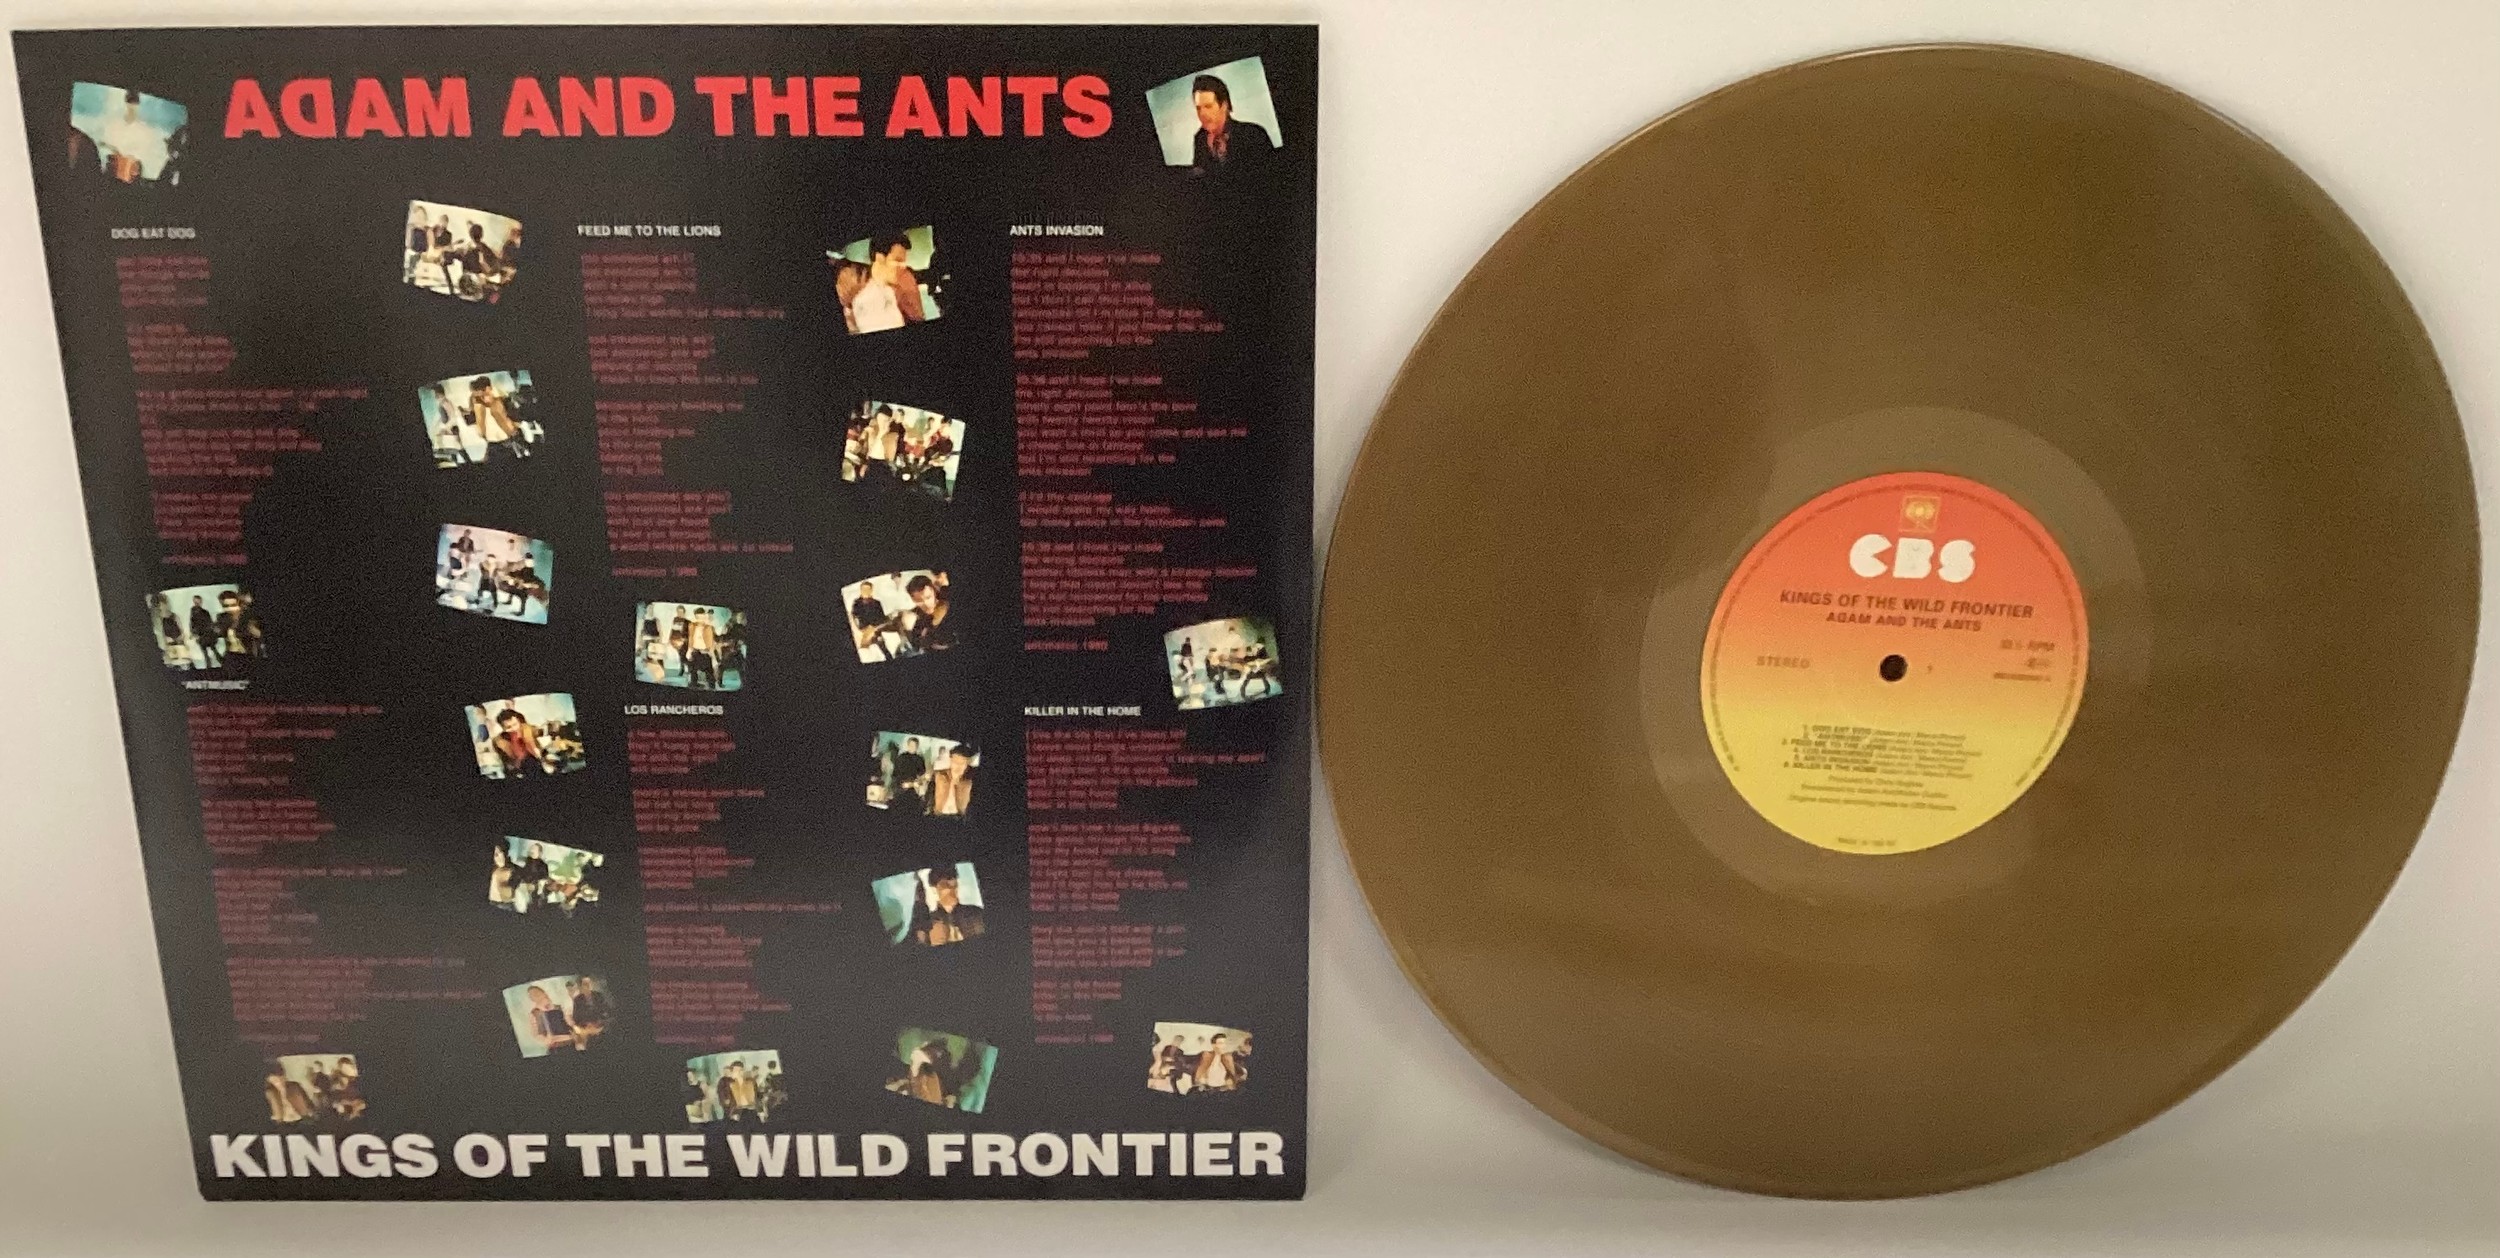 ADAM AND THE ANTS KINGS OF THE WILD FRONTIER 2016 DELUXE BOX SET GOLD VINYL. Vinyl + Cd Box Set - Image 7 of 10